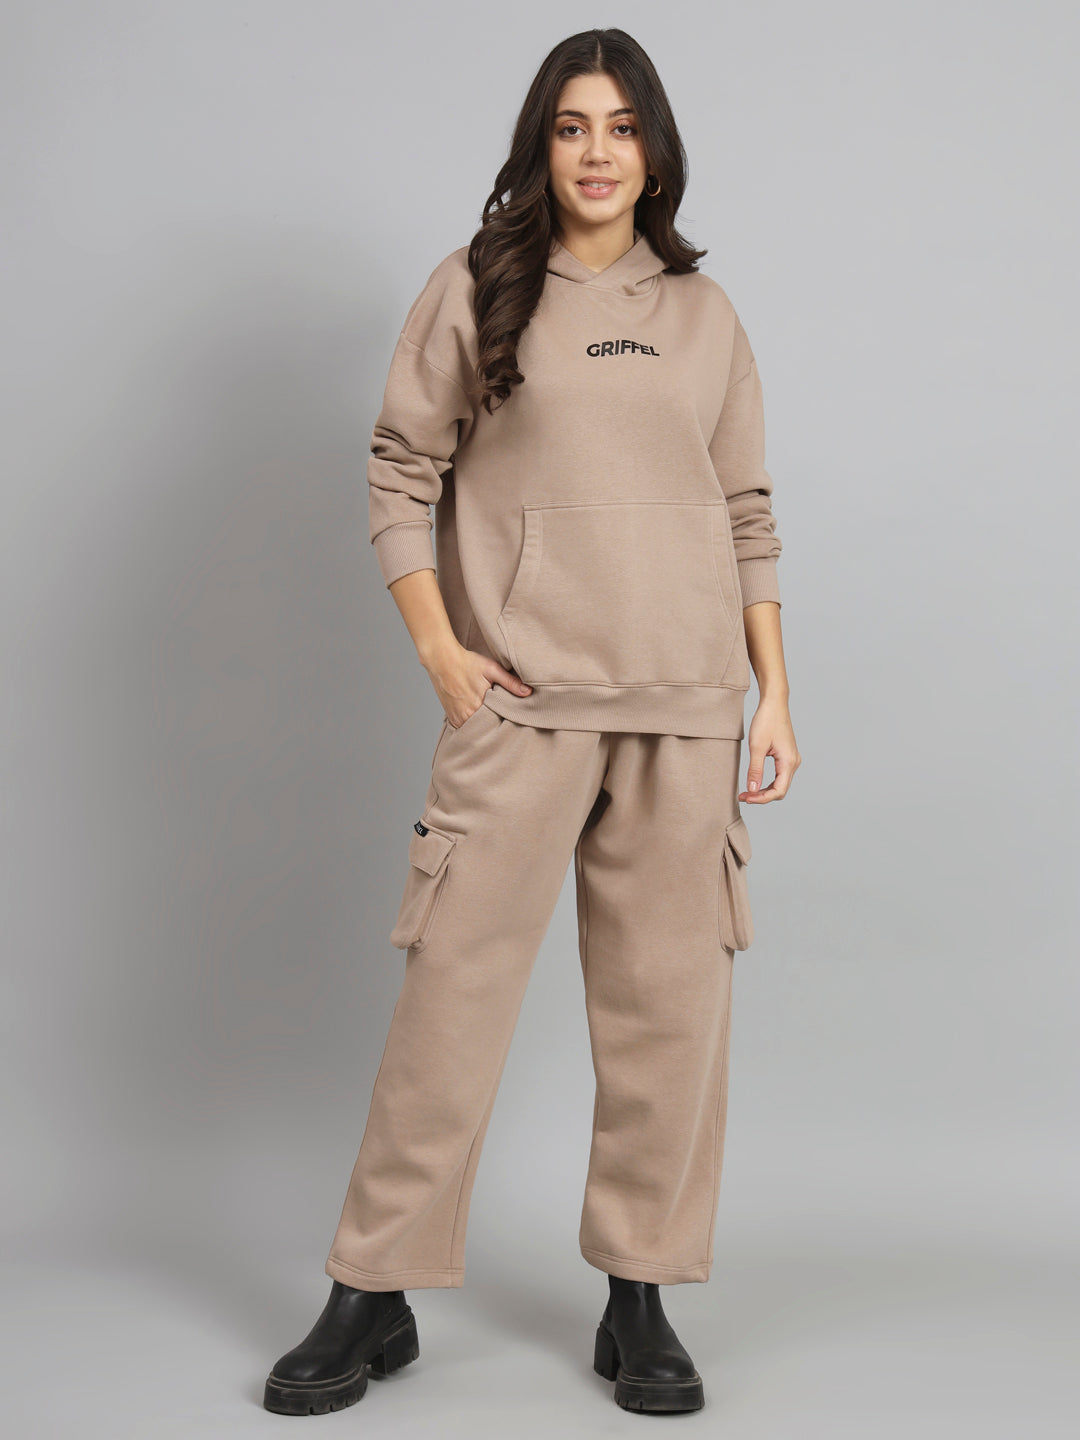 Griffel Women’s Basic Solid Oversized Fit 5 Pocket Camel Trackpant - griffel